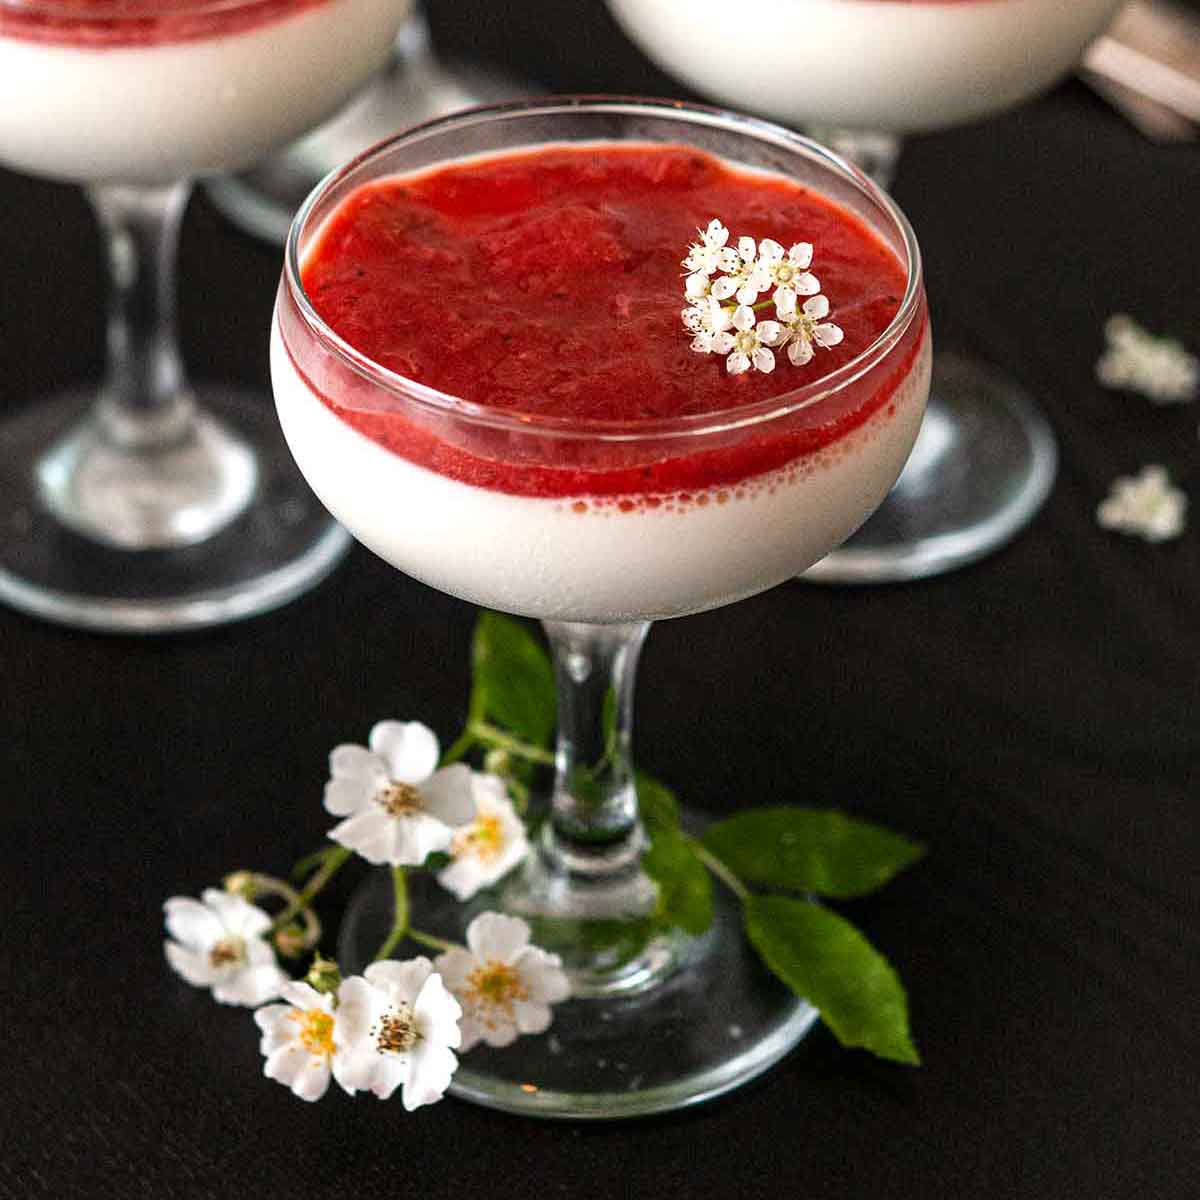 A glass of panna cotta with strawberry-rhubarb compote, garnished with flowers, on a table.